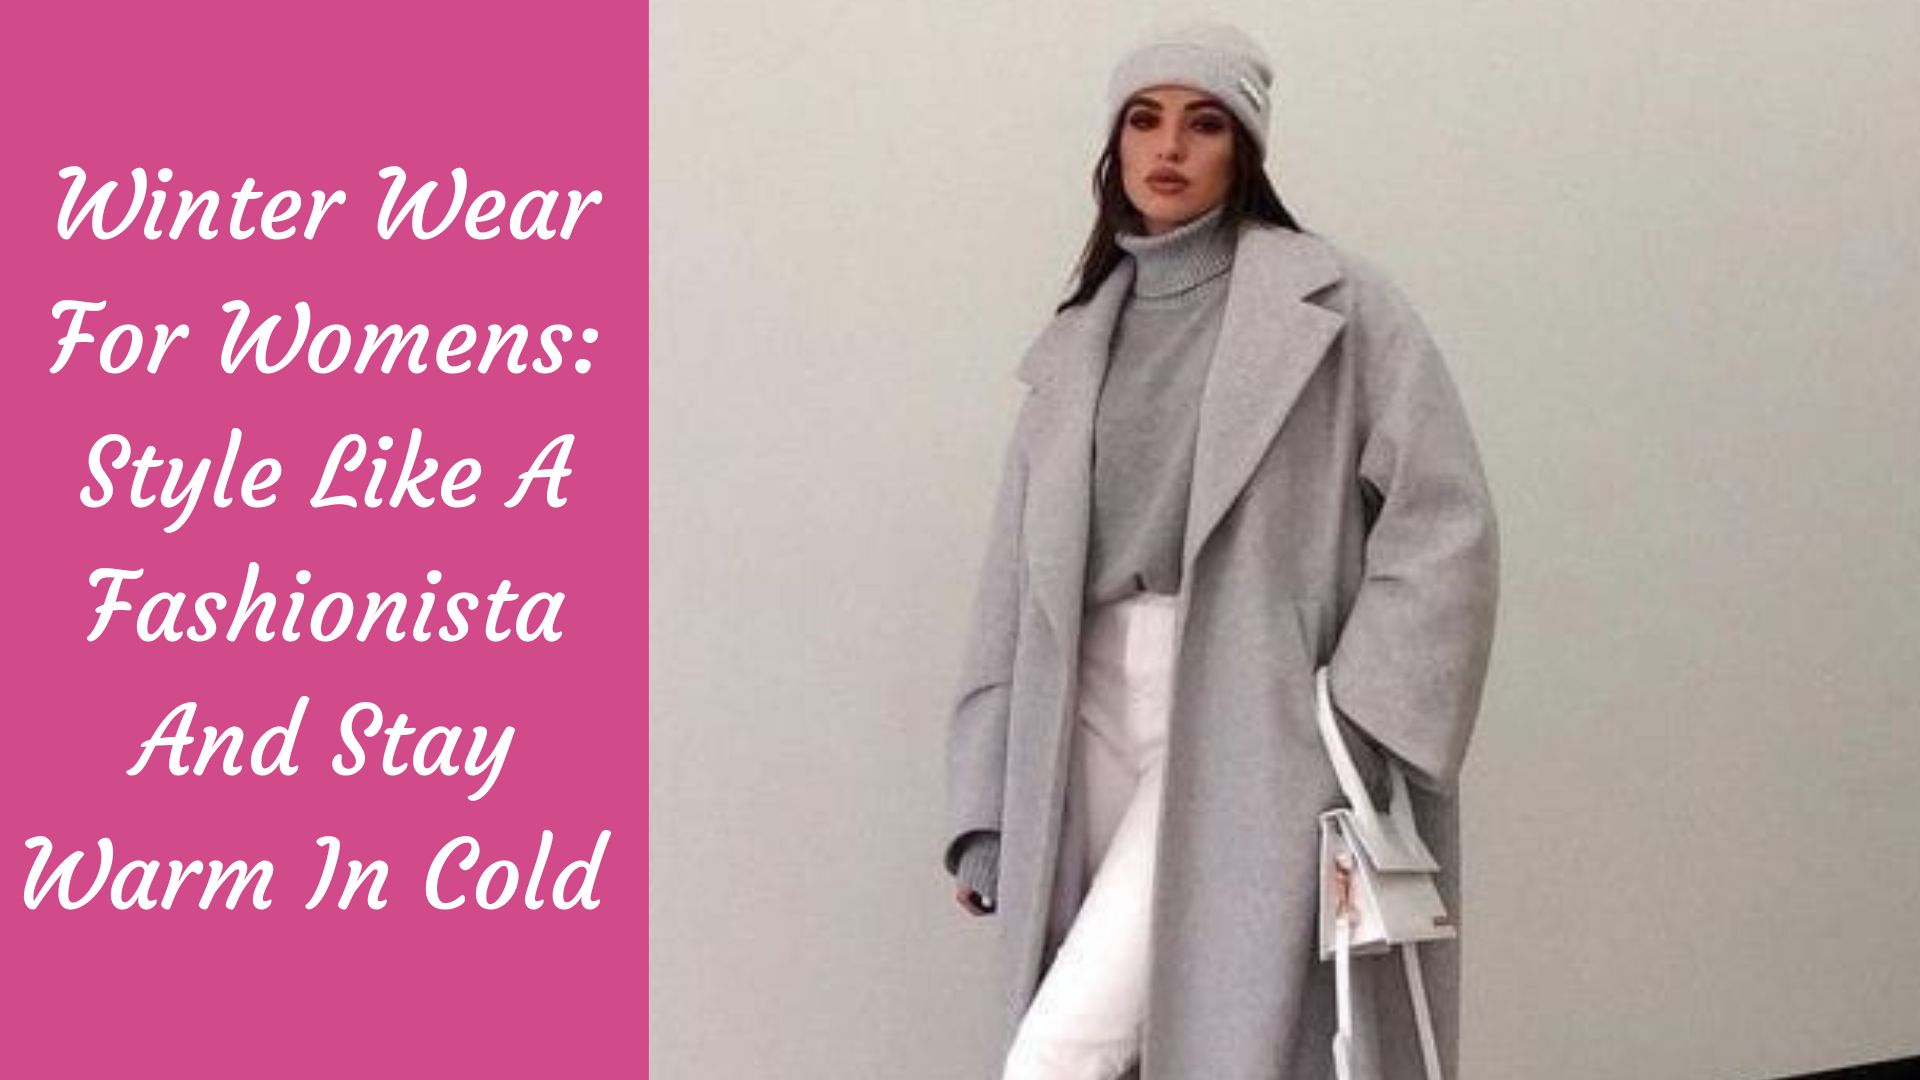 21 Cold Weather Outfit Ideas to Embrace the Outdoors in Style